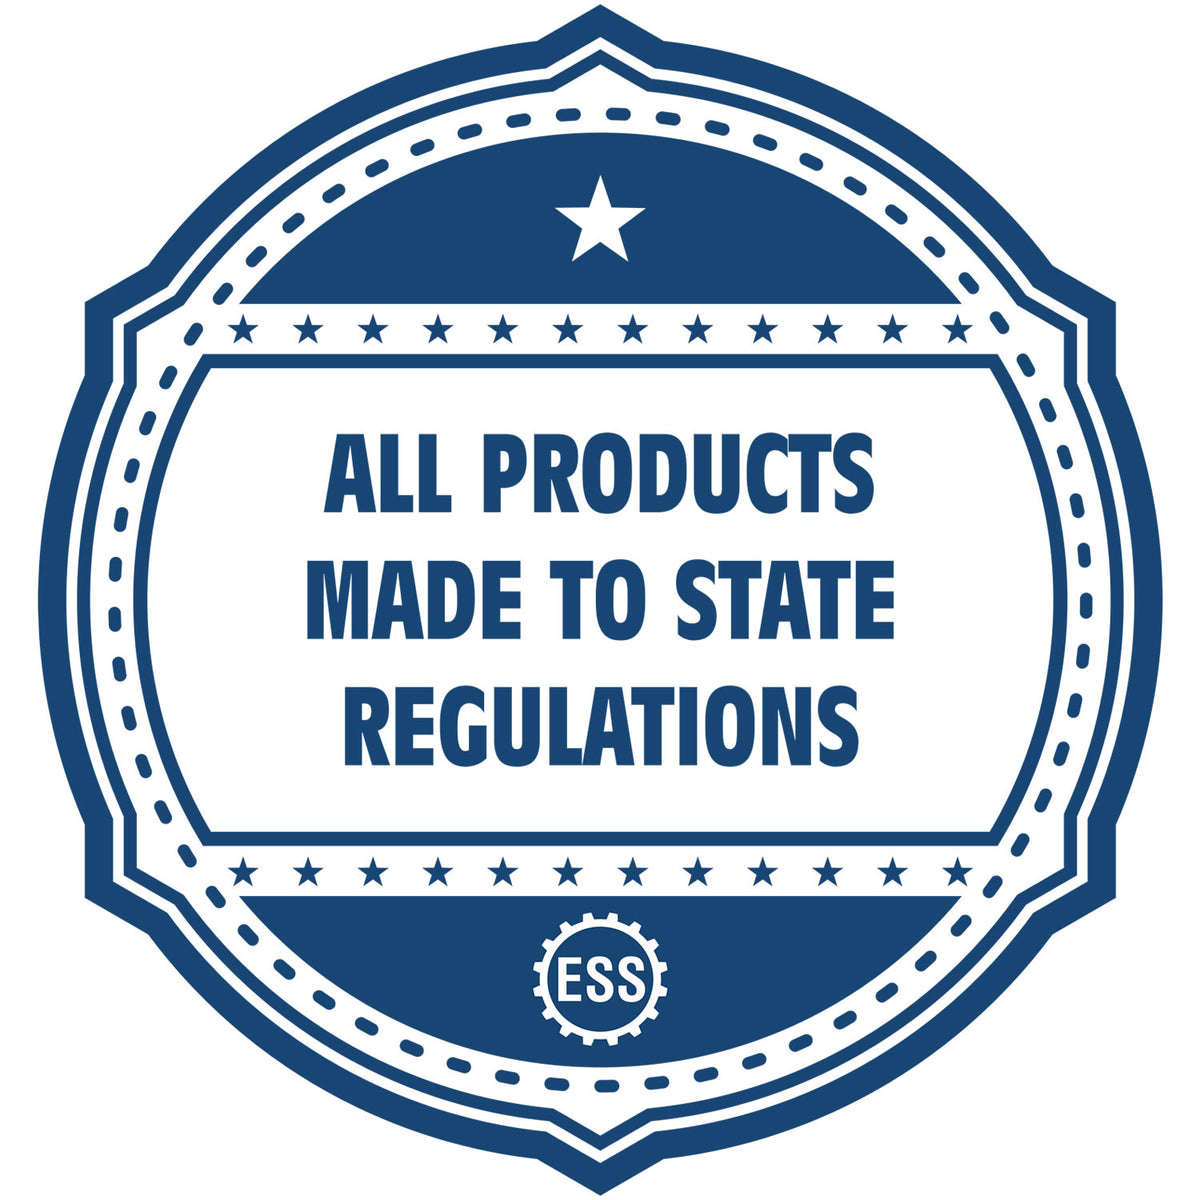 A blue icon or badge for the Minnesota Professional Geologist Seal Stamp showing that this product is made in compliance with state regulations.